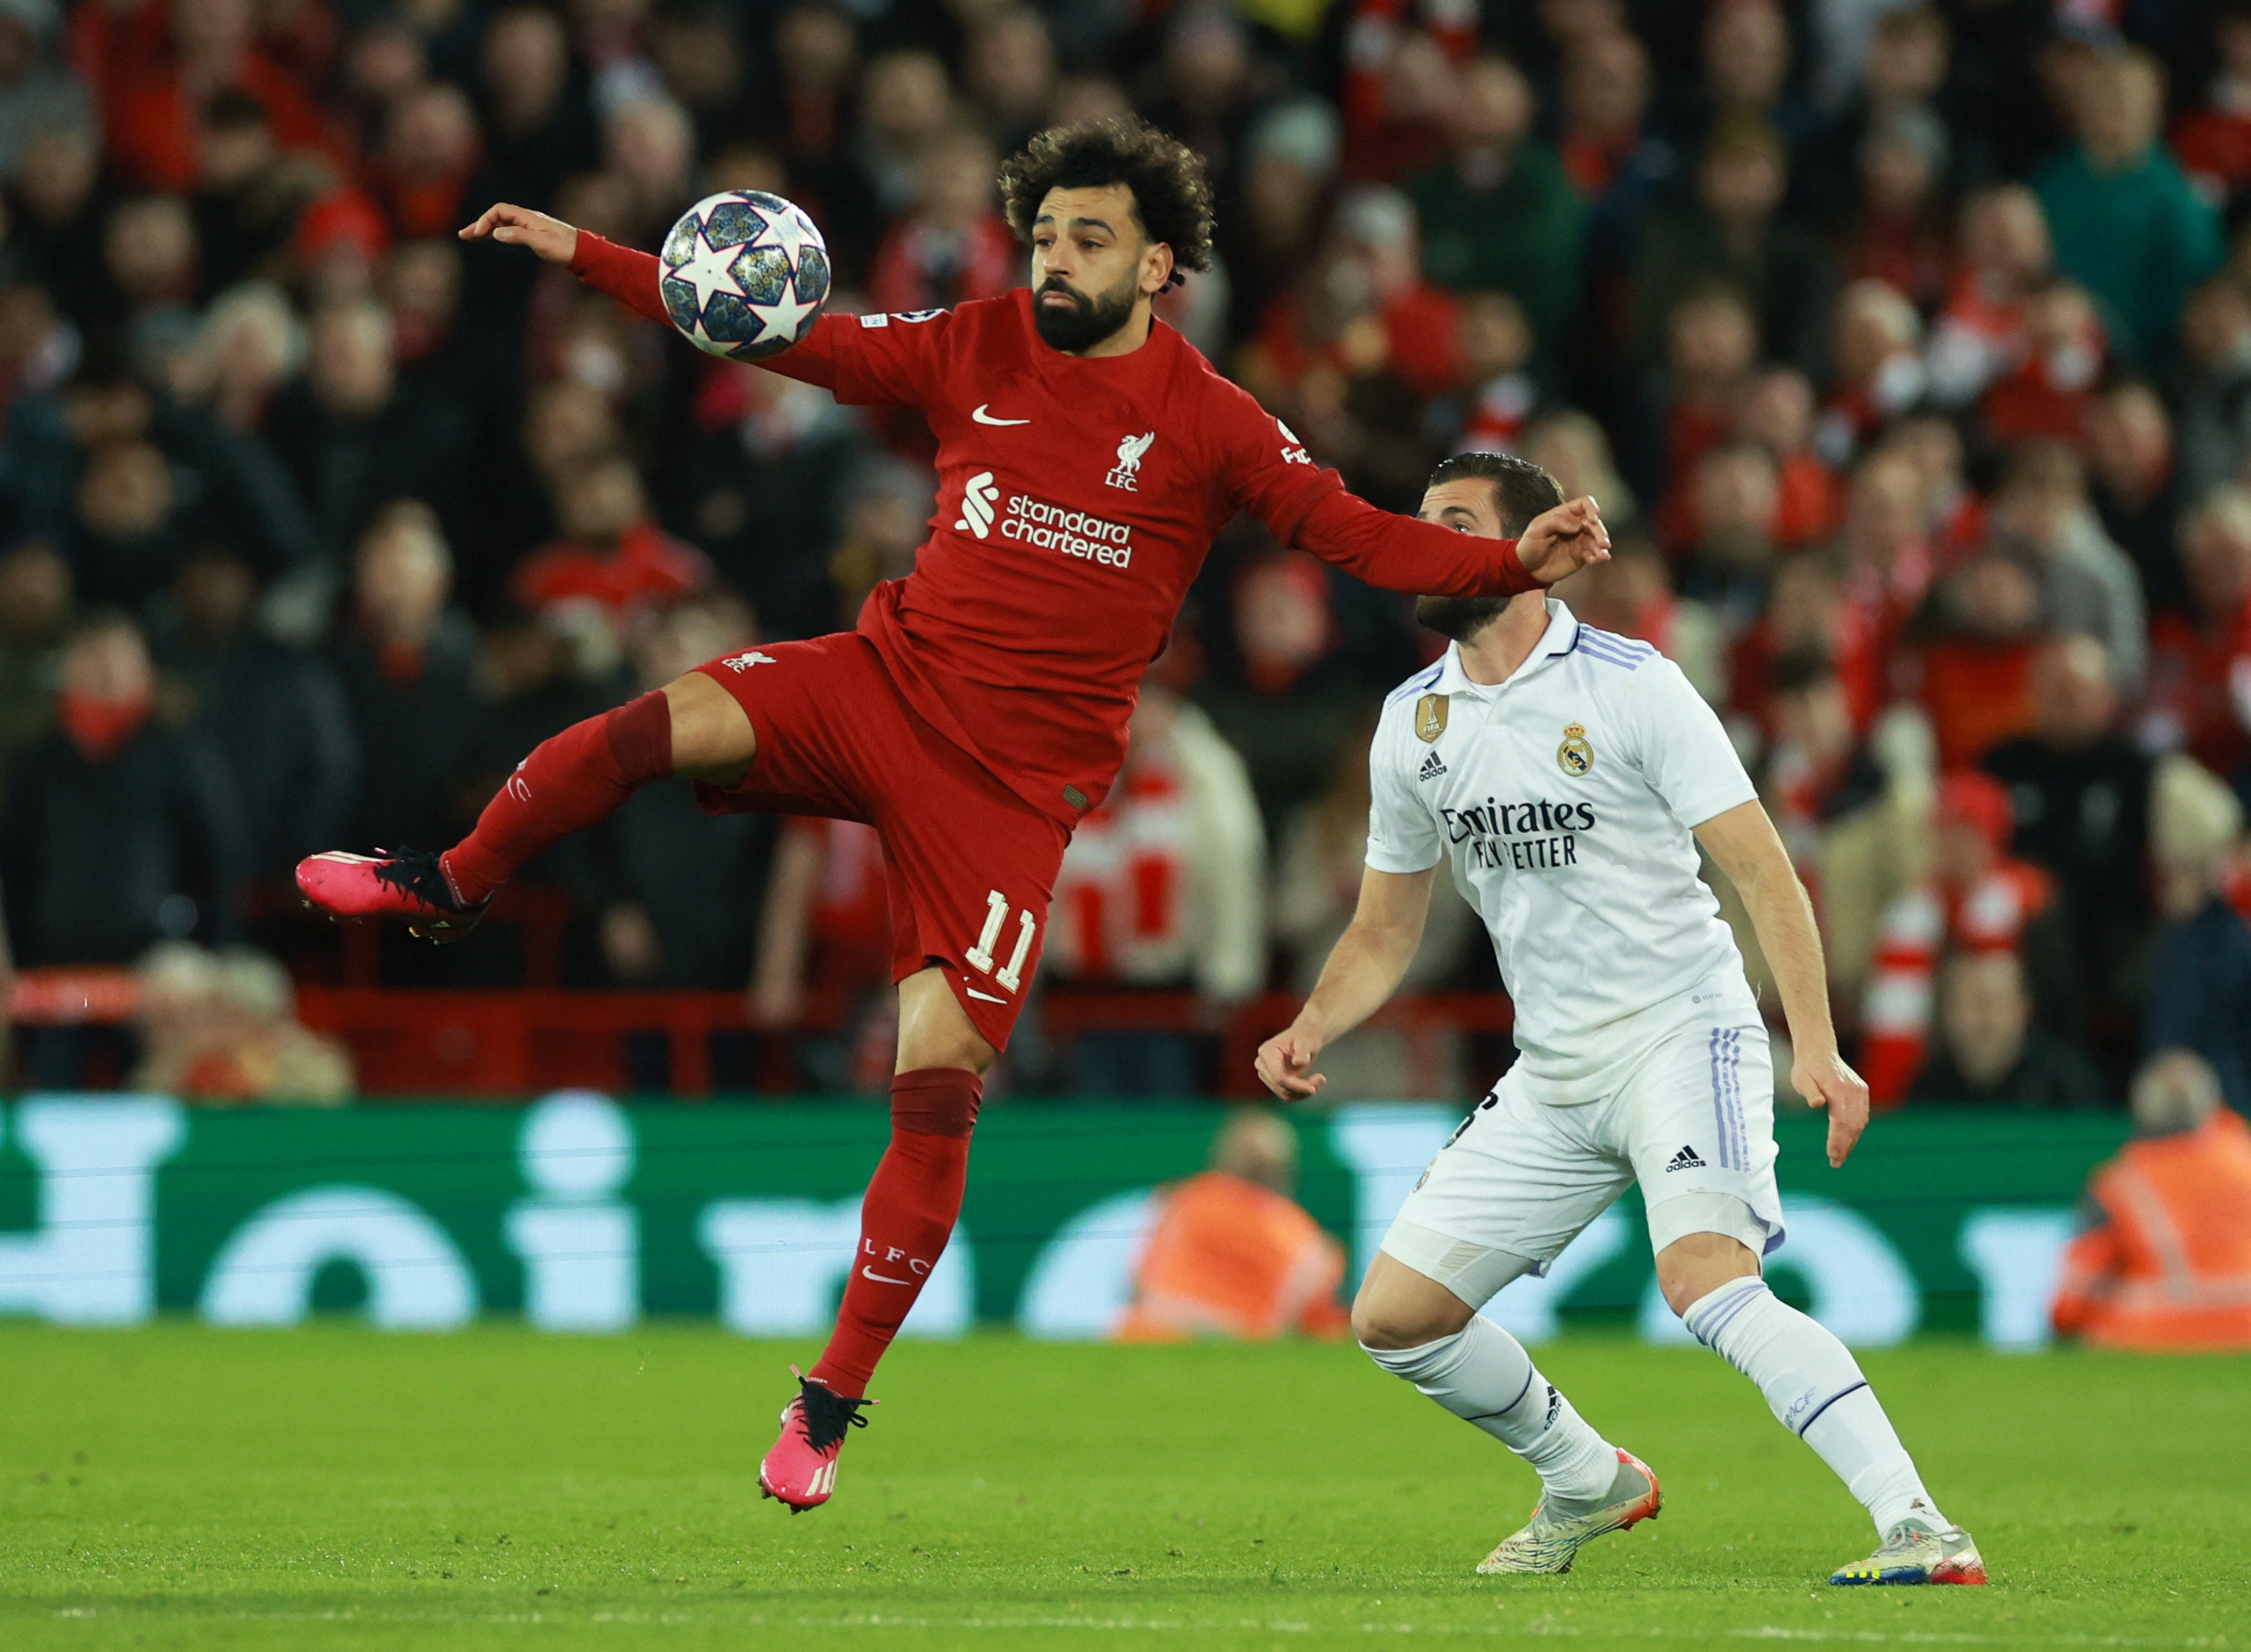 Mo Salah scored to put Liverpool 2-0 up but things went downhill from there